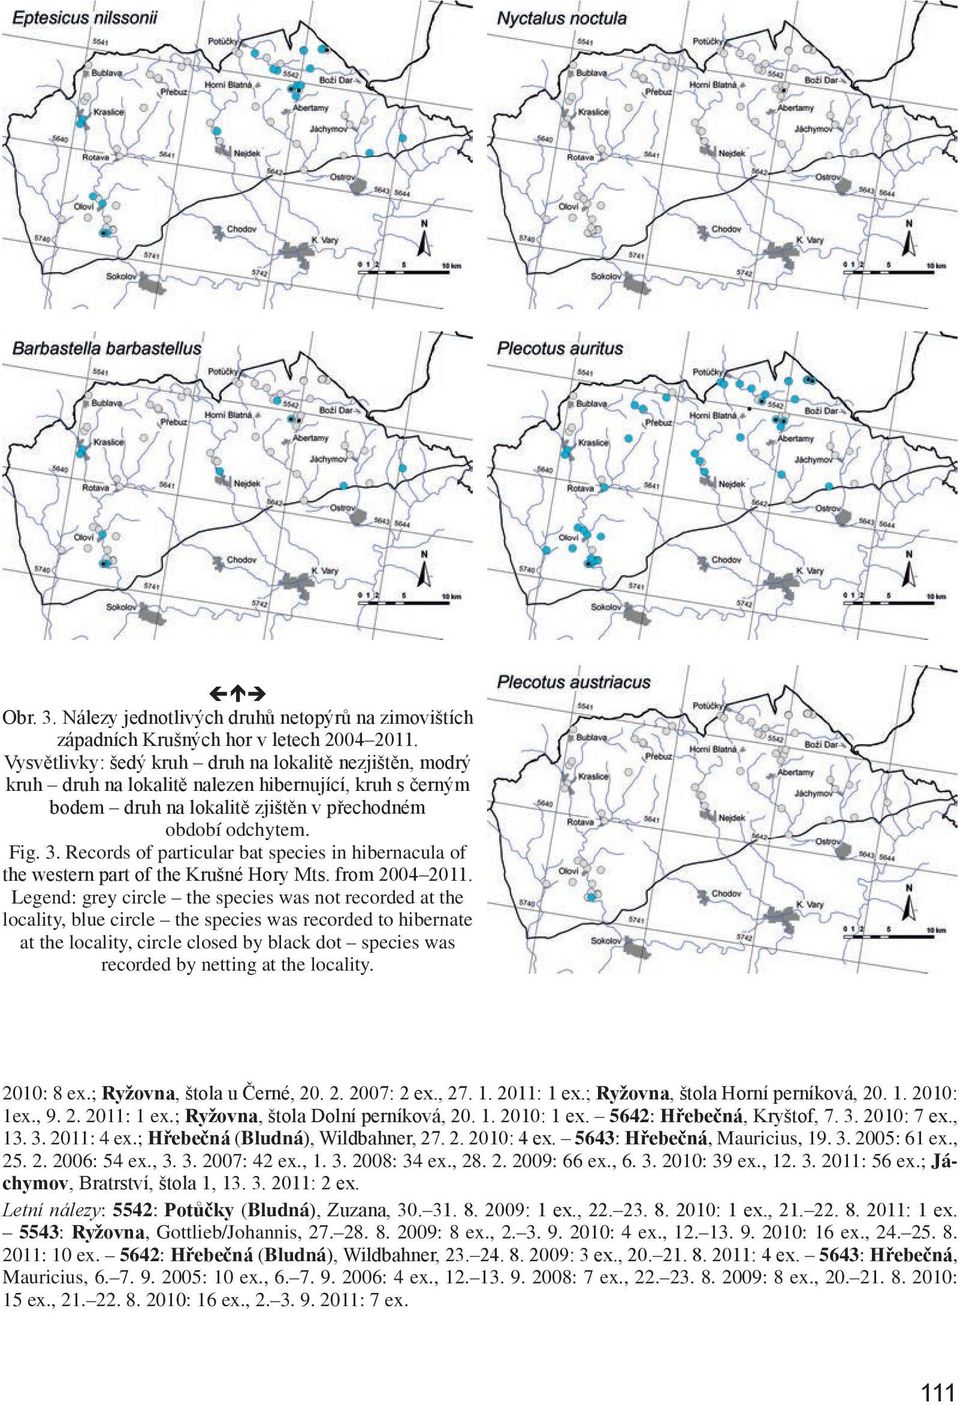 Records of particular bat species in hibernacula of the western part of the Krušné Hory Mts. from 2004 2011.